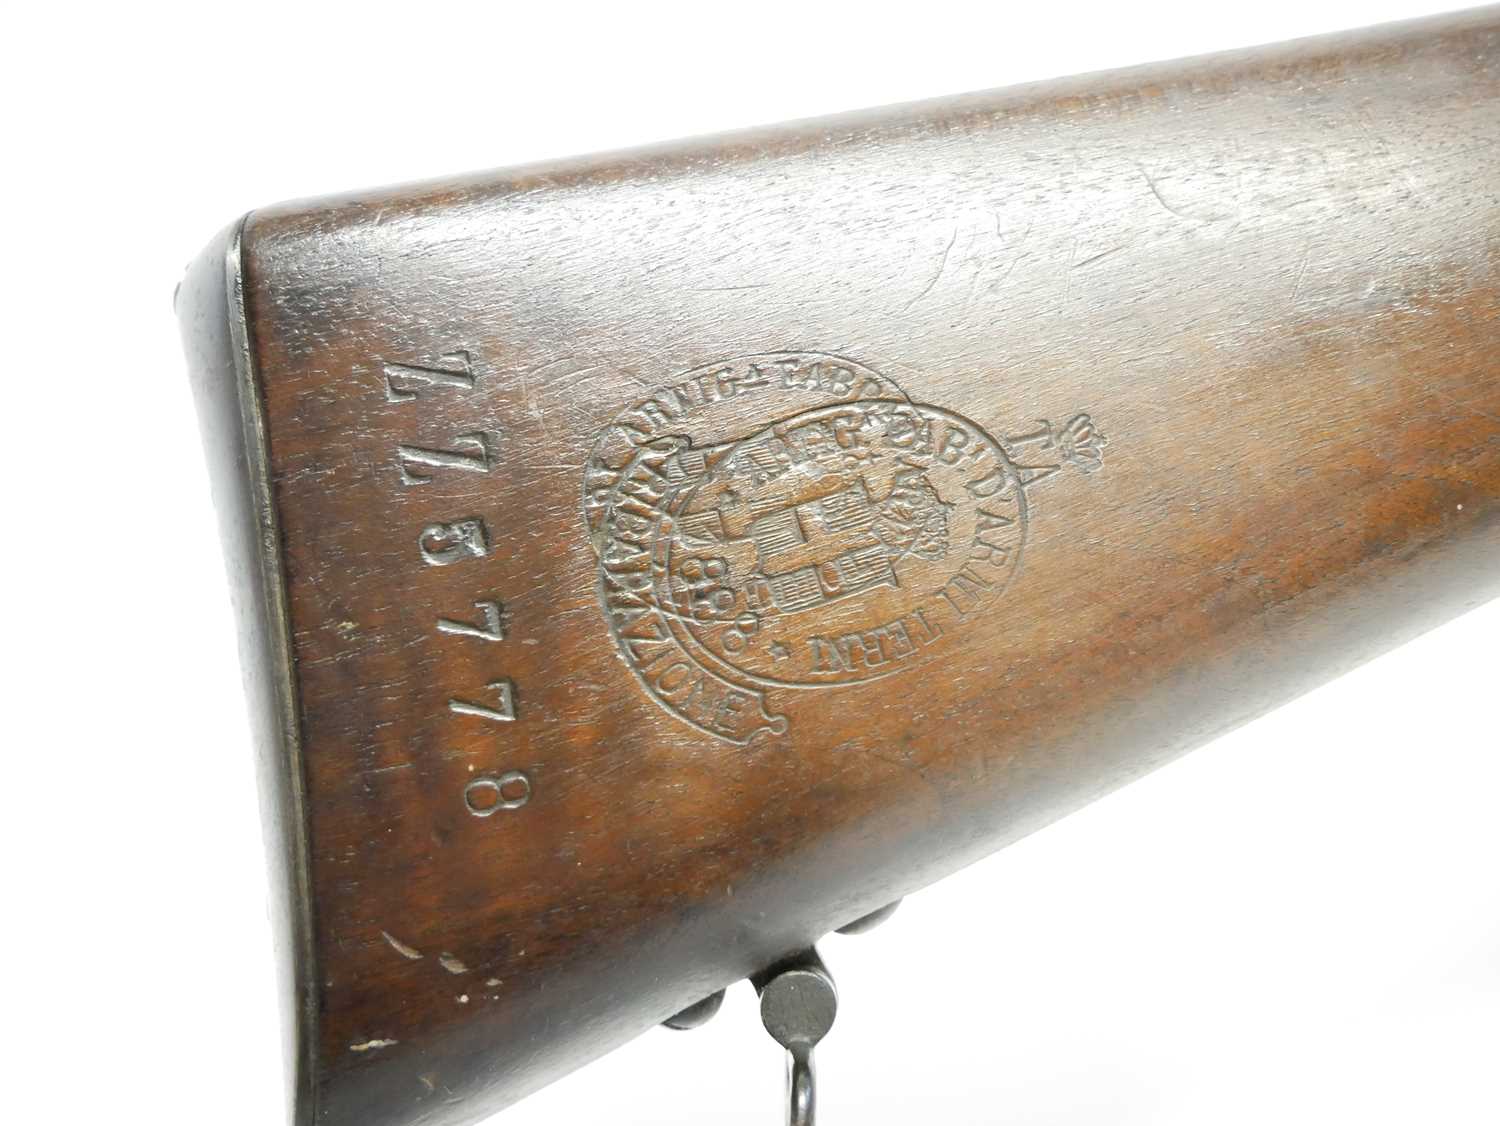 Italian Vetterli M.1870/87 10.35x47R bolt action rifle, serial number 5778, 33.5inch barrel fitted - Image 3 of 17